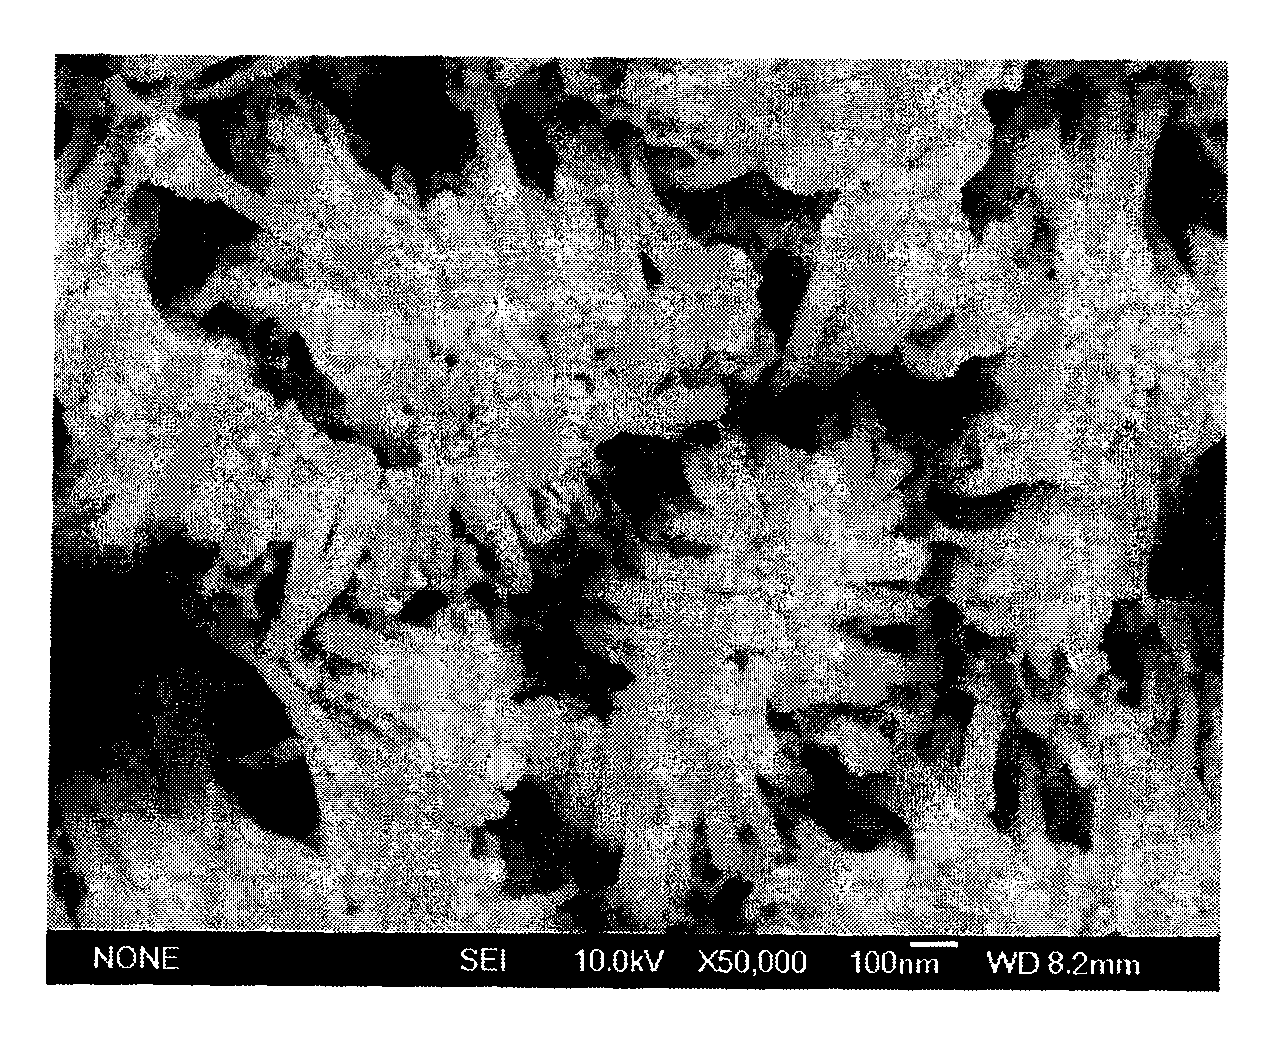 Method for making scanning electron microscope example for assembling nanometer line array in aluminum oxide template